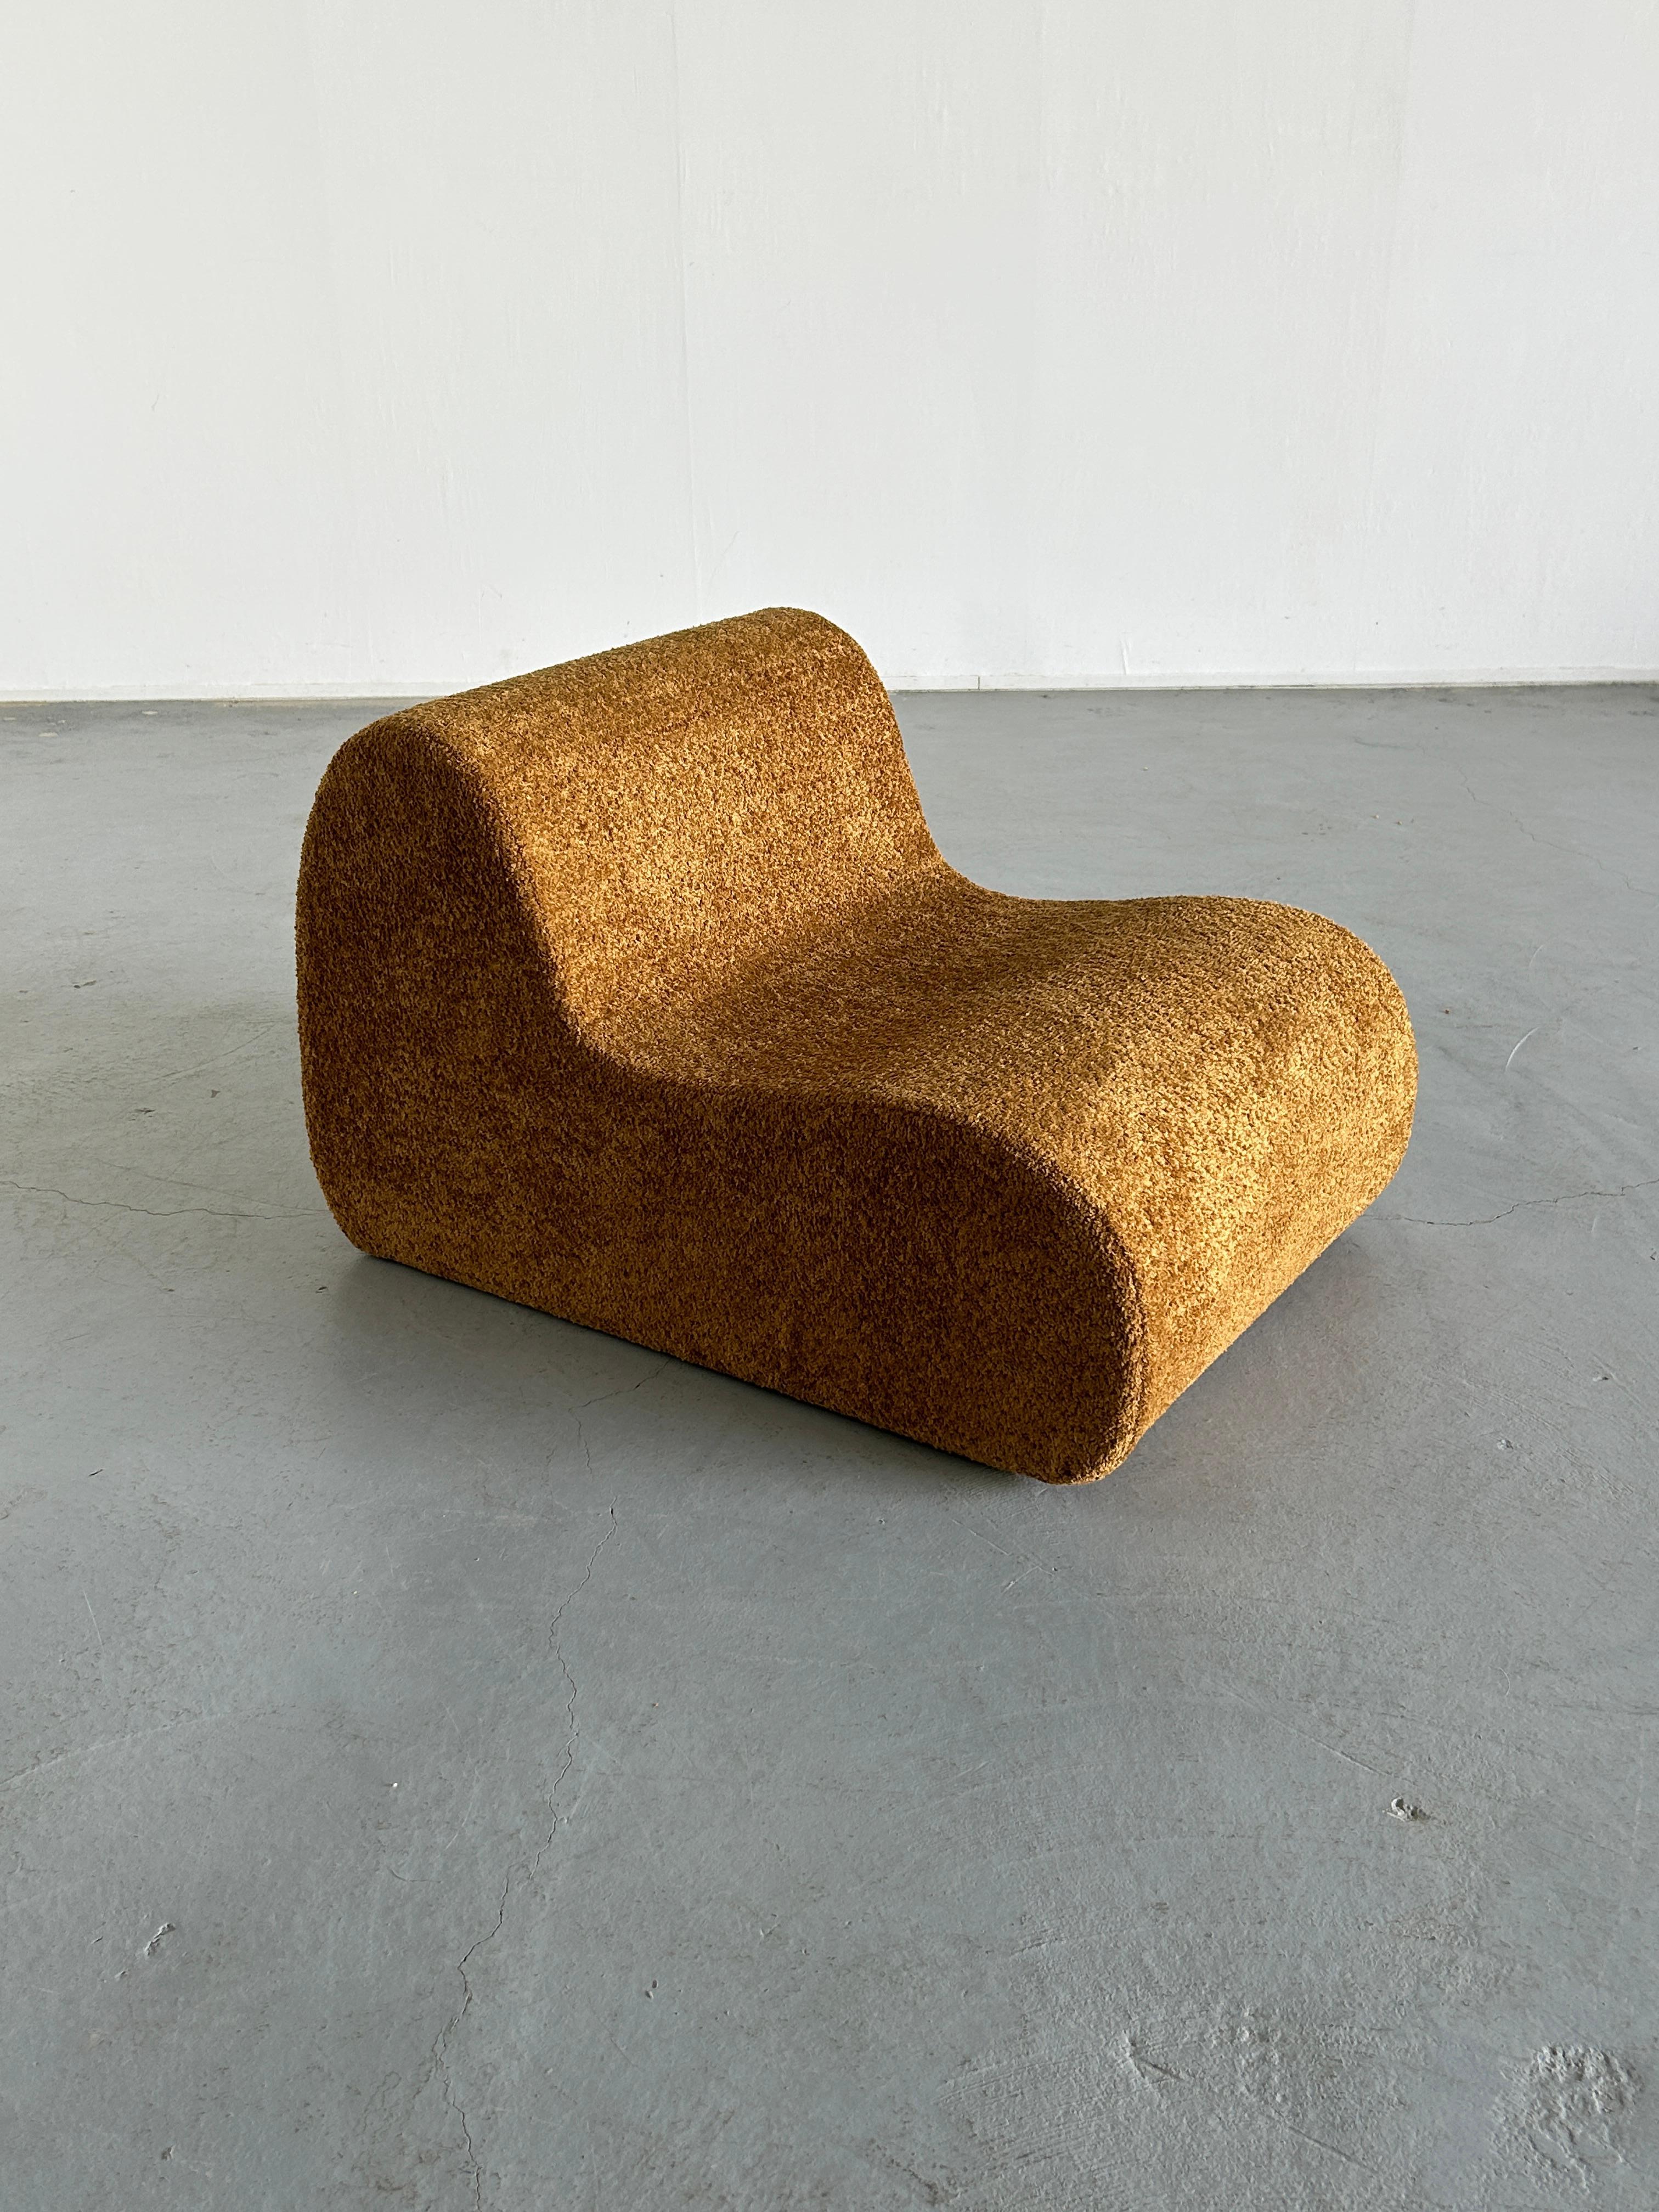 Vintage Italian Mid-Century-Modern Lounge Chair in Ochre Boucle, 1970s Italy For Sale 1